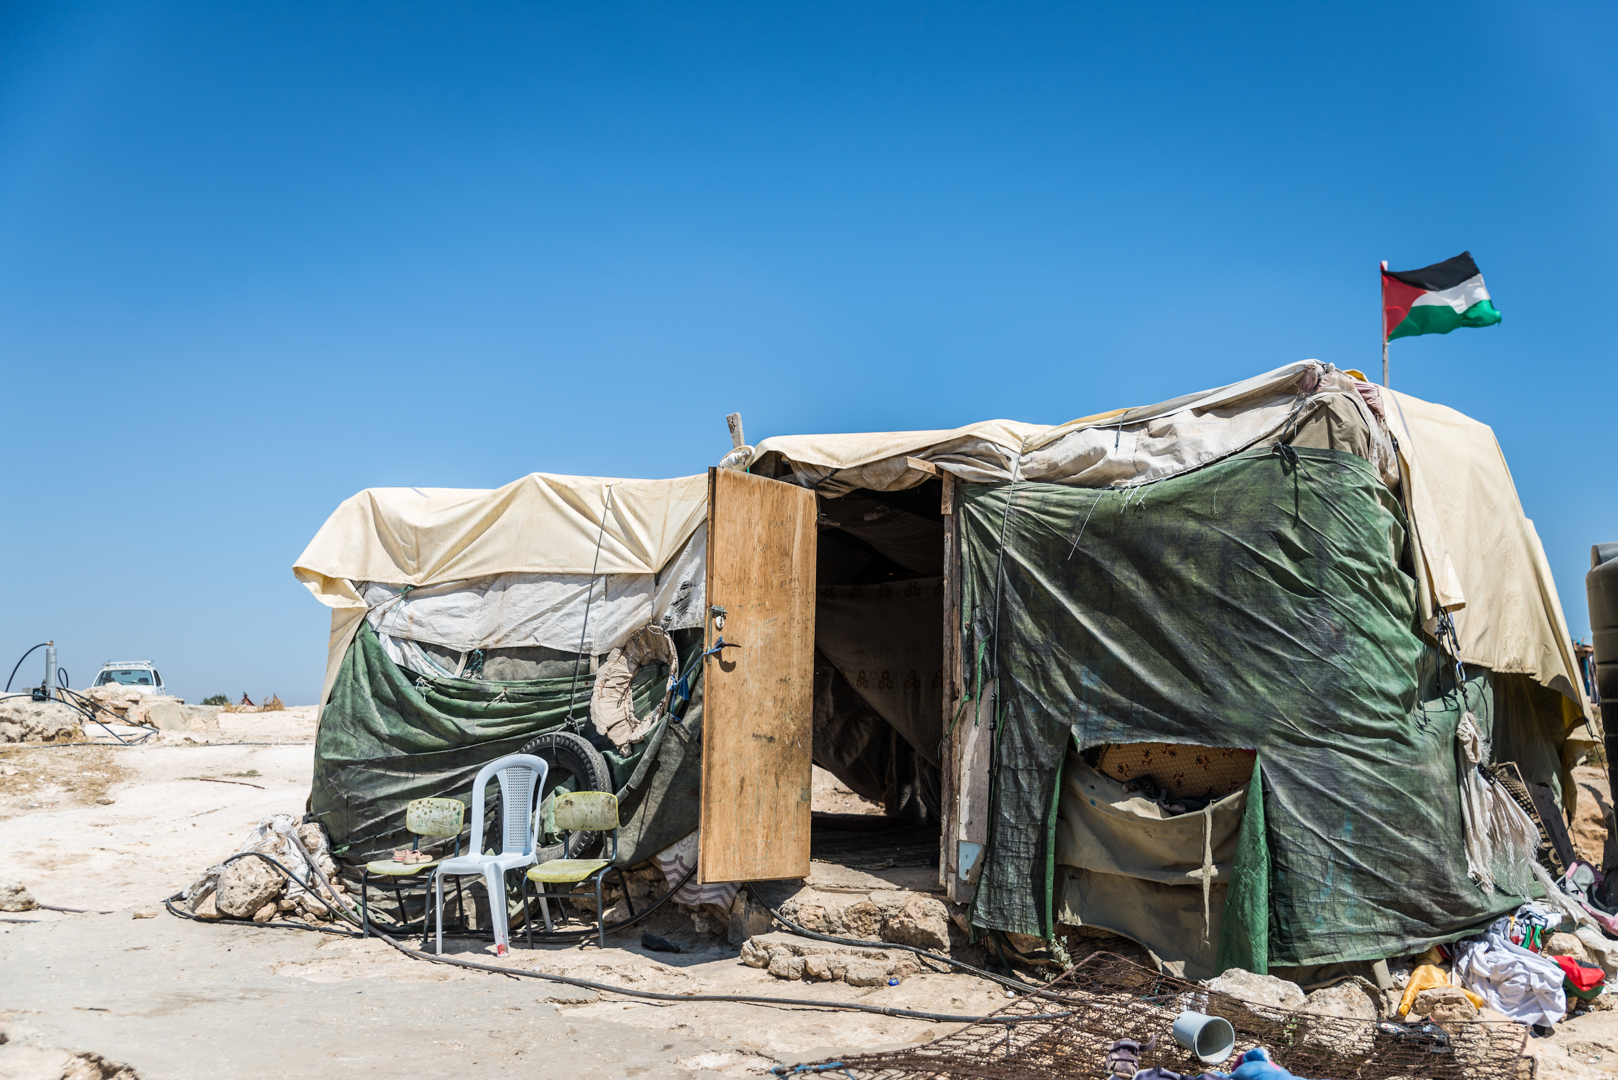 One of the residential tents in Susiya that is scheduled to be demolished before the 3rd of August 2015.